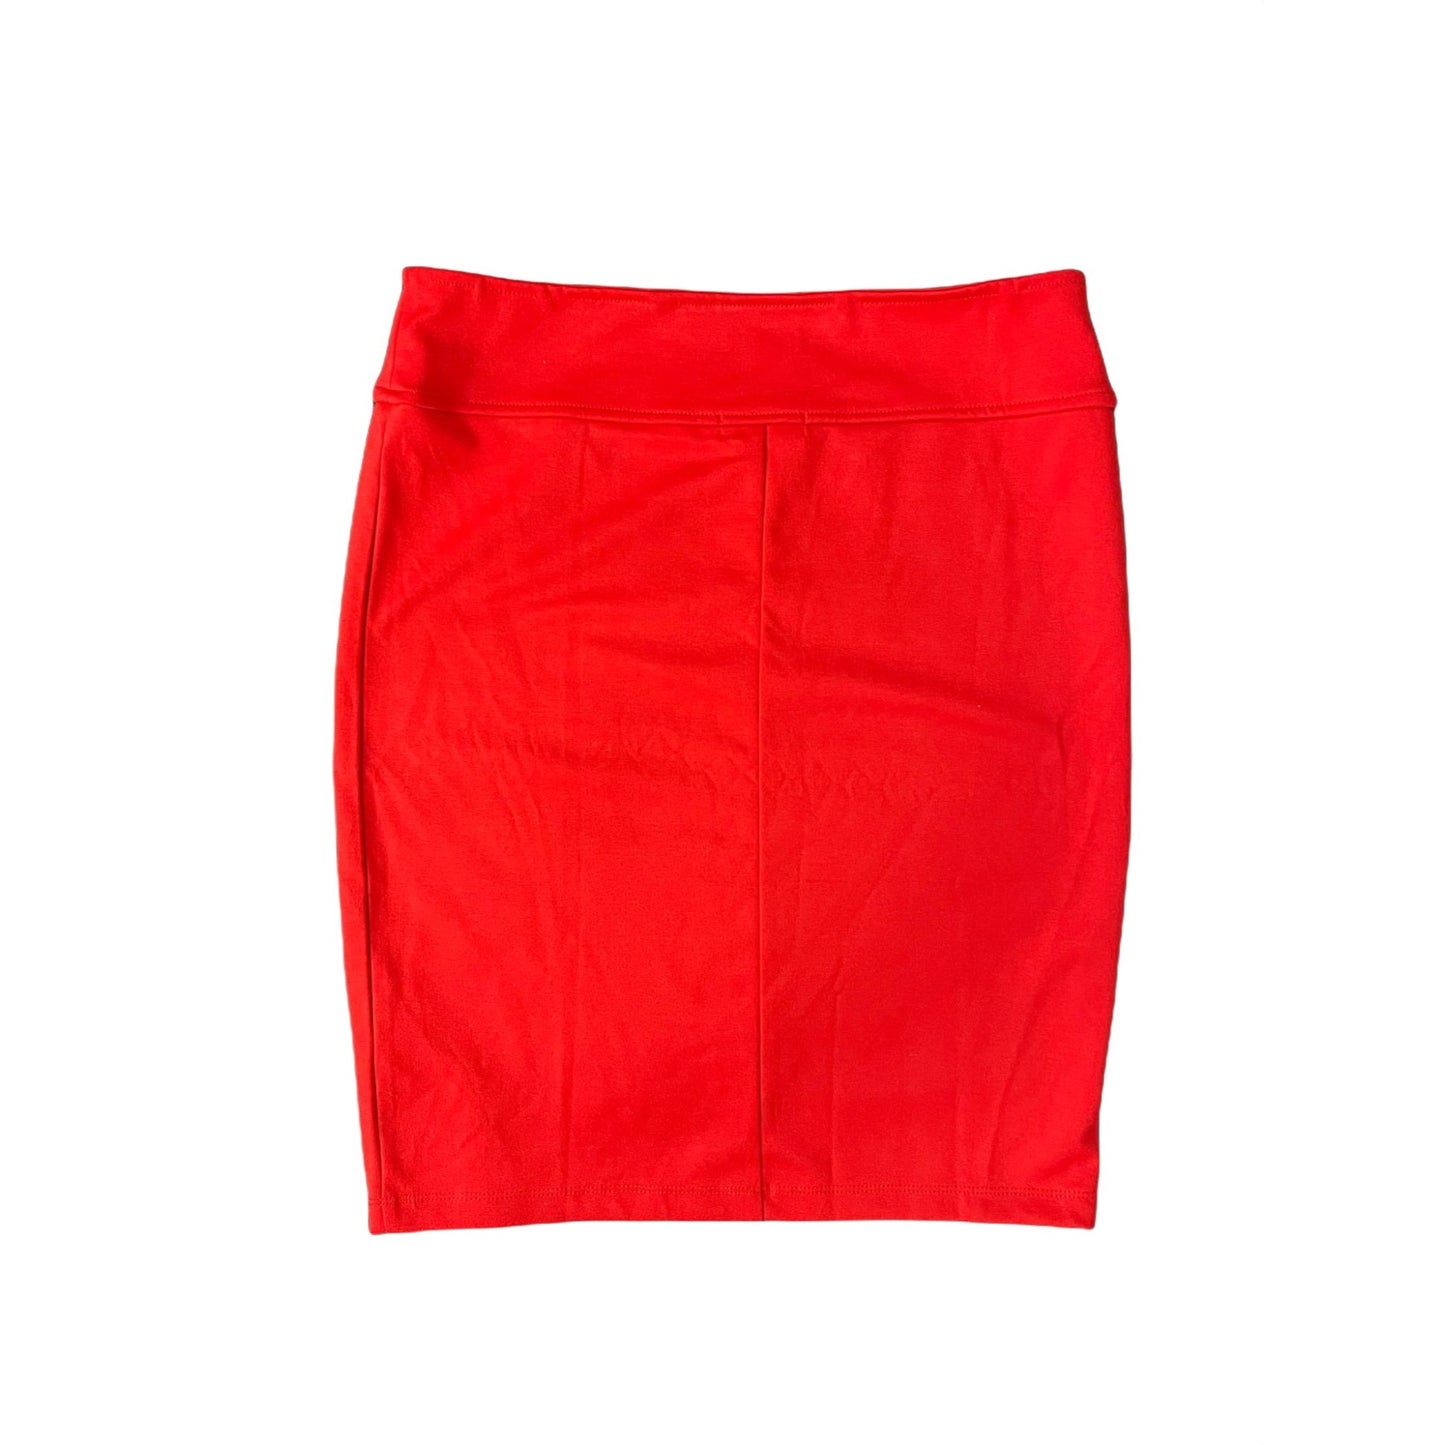 Red Pencil Skirt - L